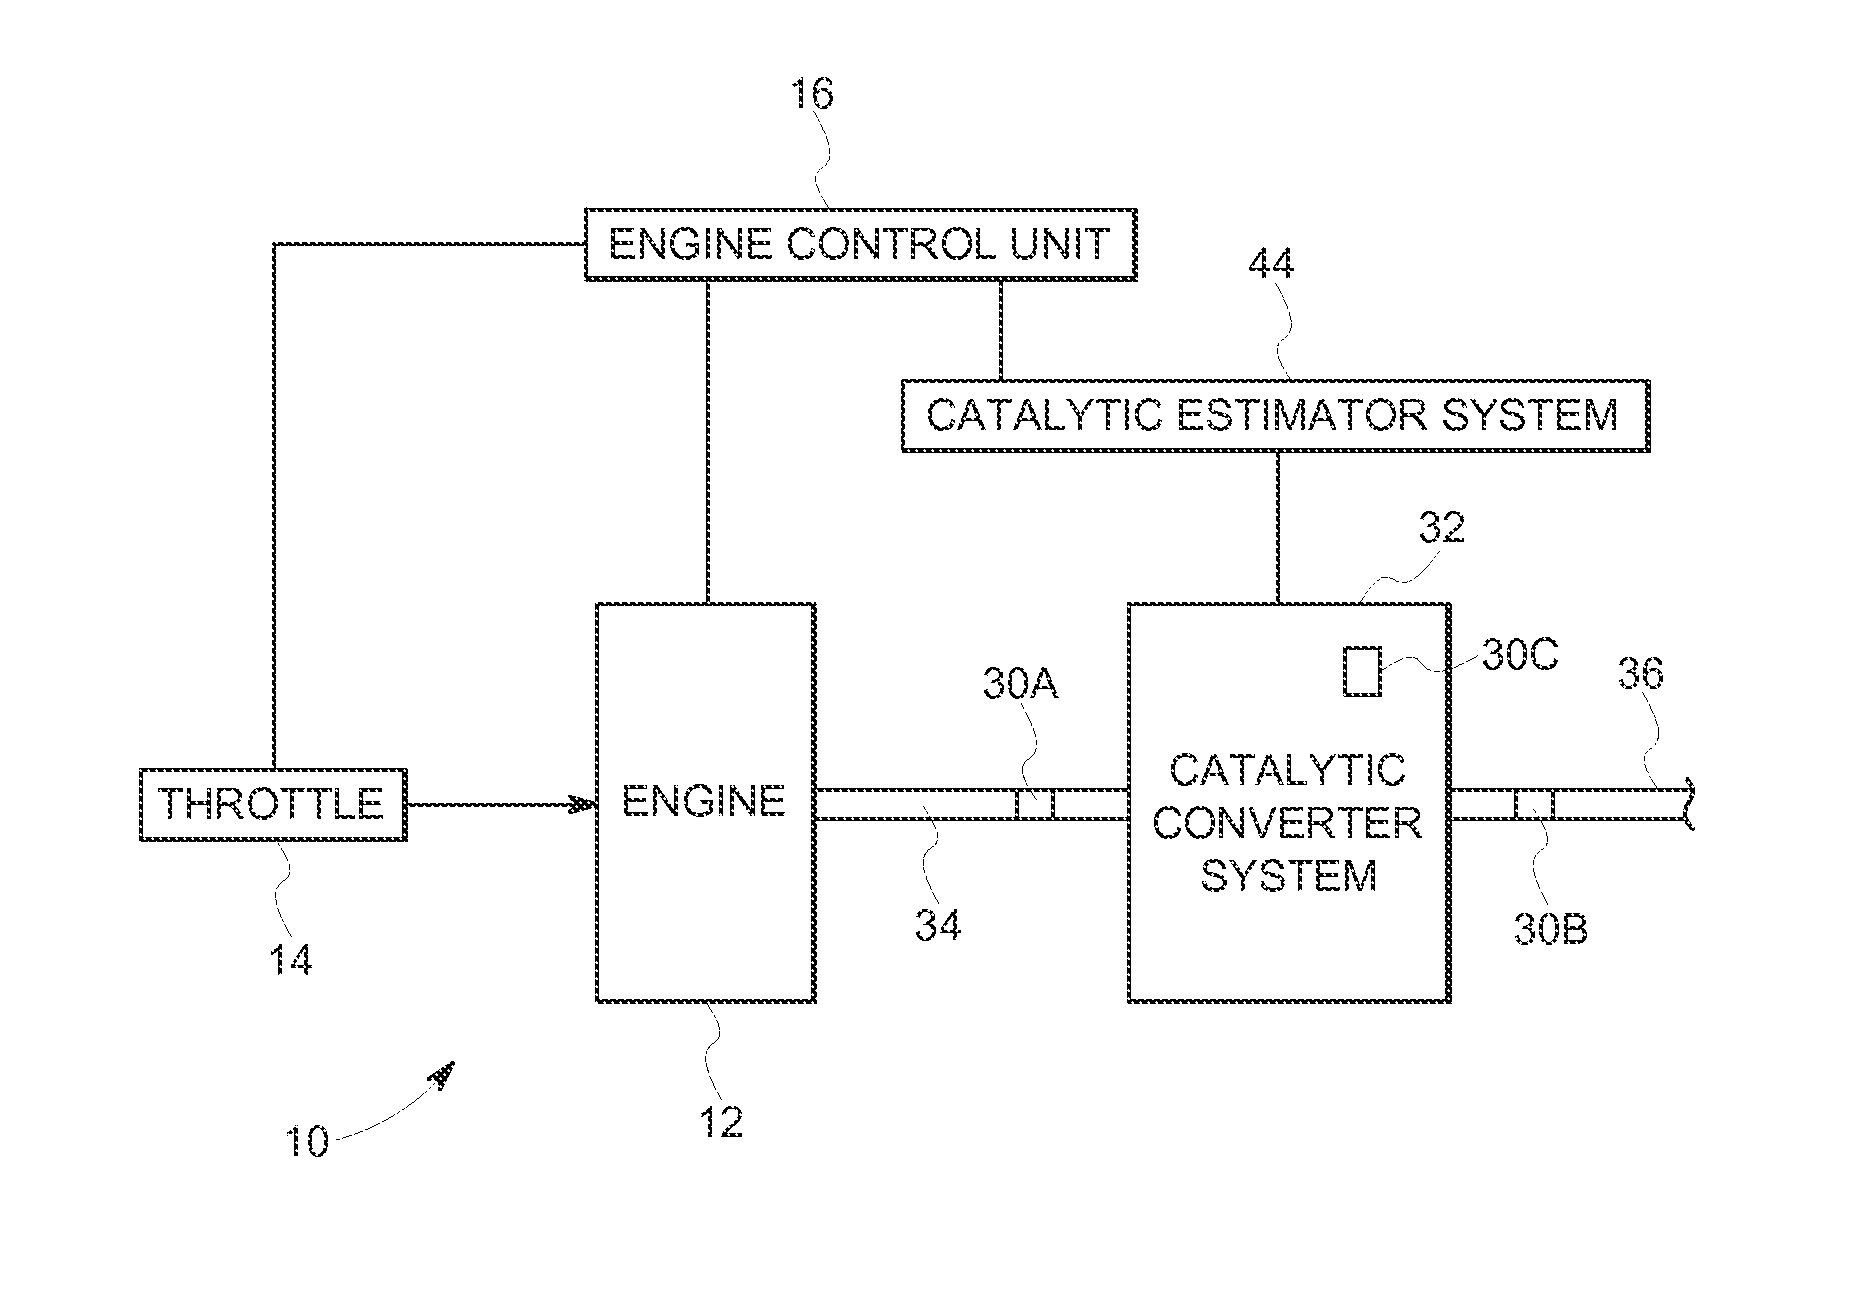 Systems and methods for model based control of catalytic converter systems